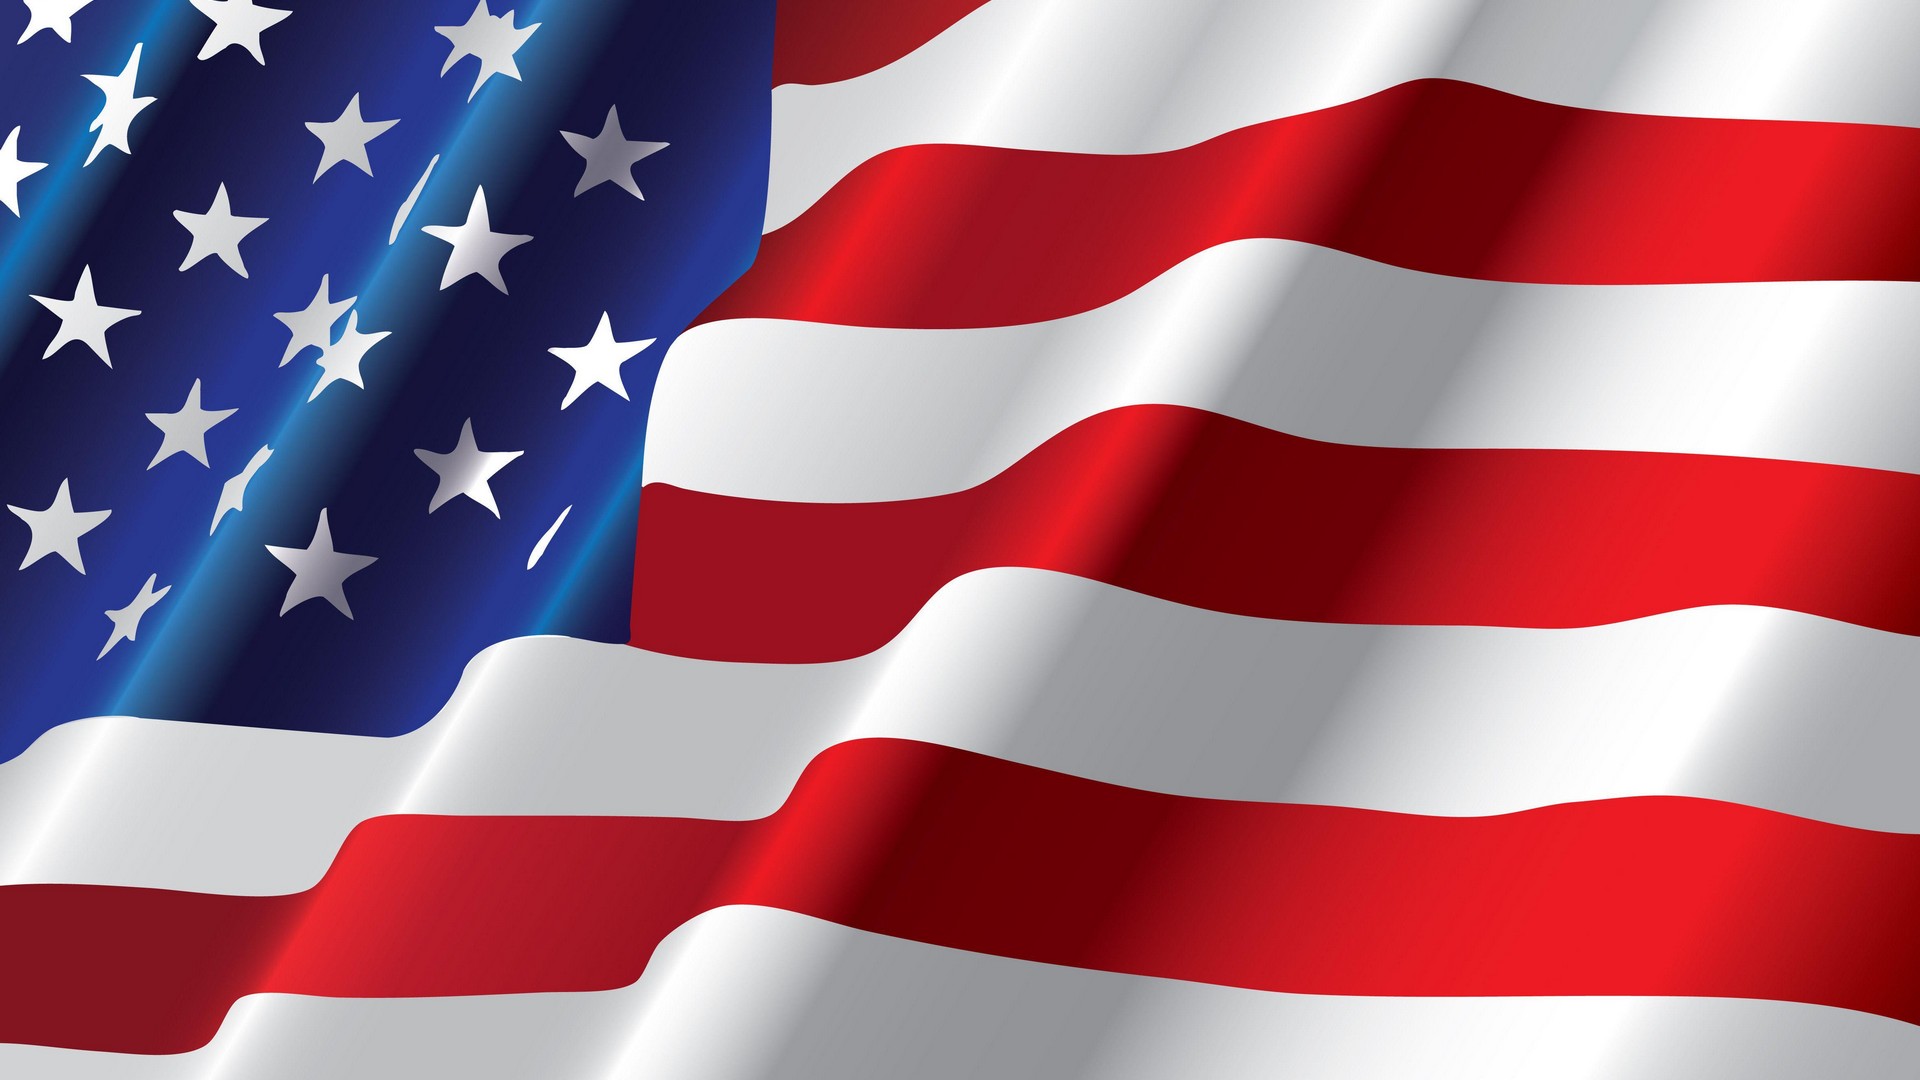 Wallpaper American Flag HD with high-resolution 1920x1080 pixel. You can use this wallpaper for your Desktop Computer Backgrounds, Mac Wallpapers, Android Lock screen or iPhone Screensavers and another smartphone device